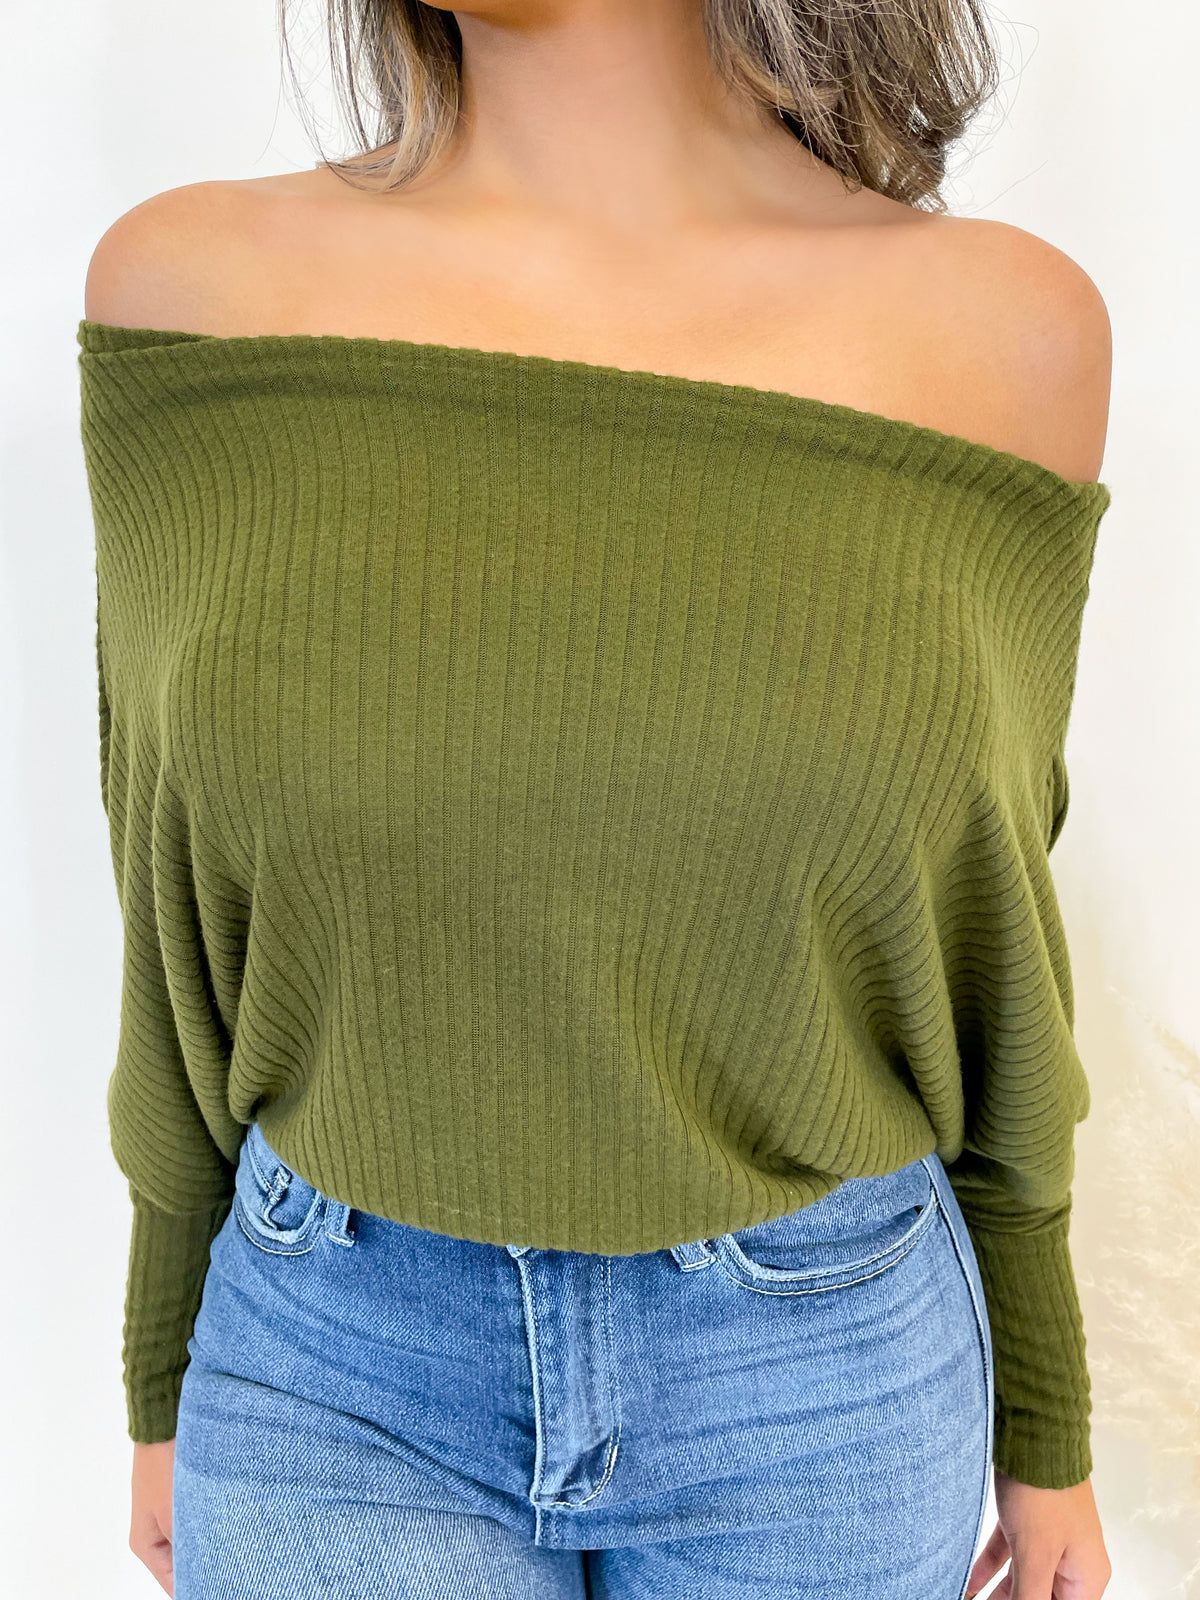  olive long sleeve top, ribbed, high neck, droopy neckline